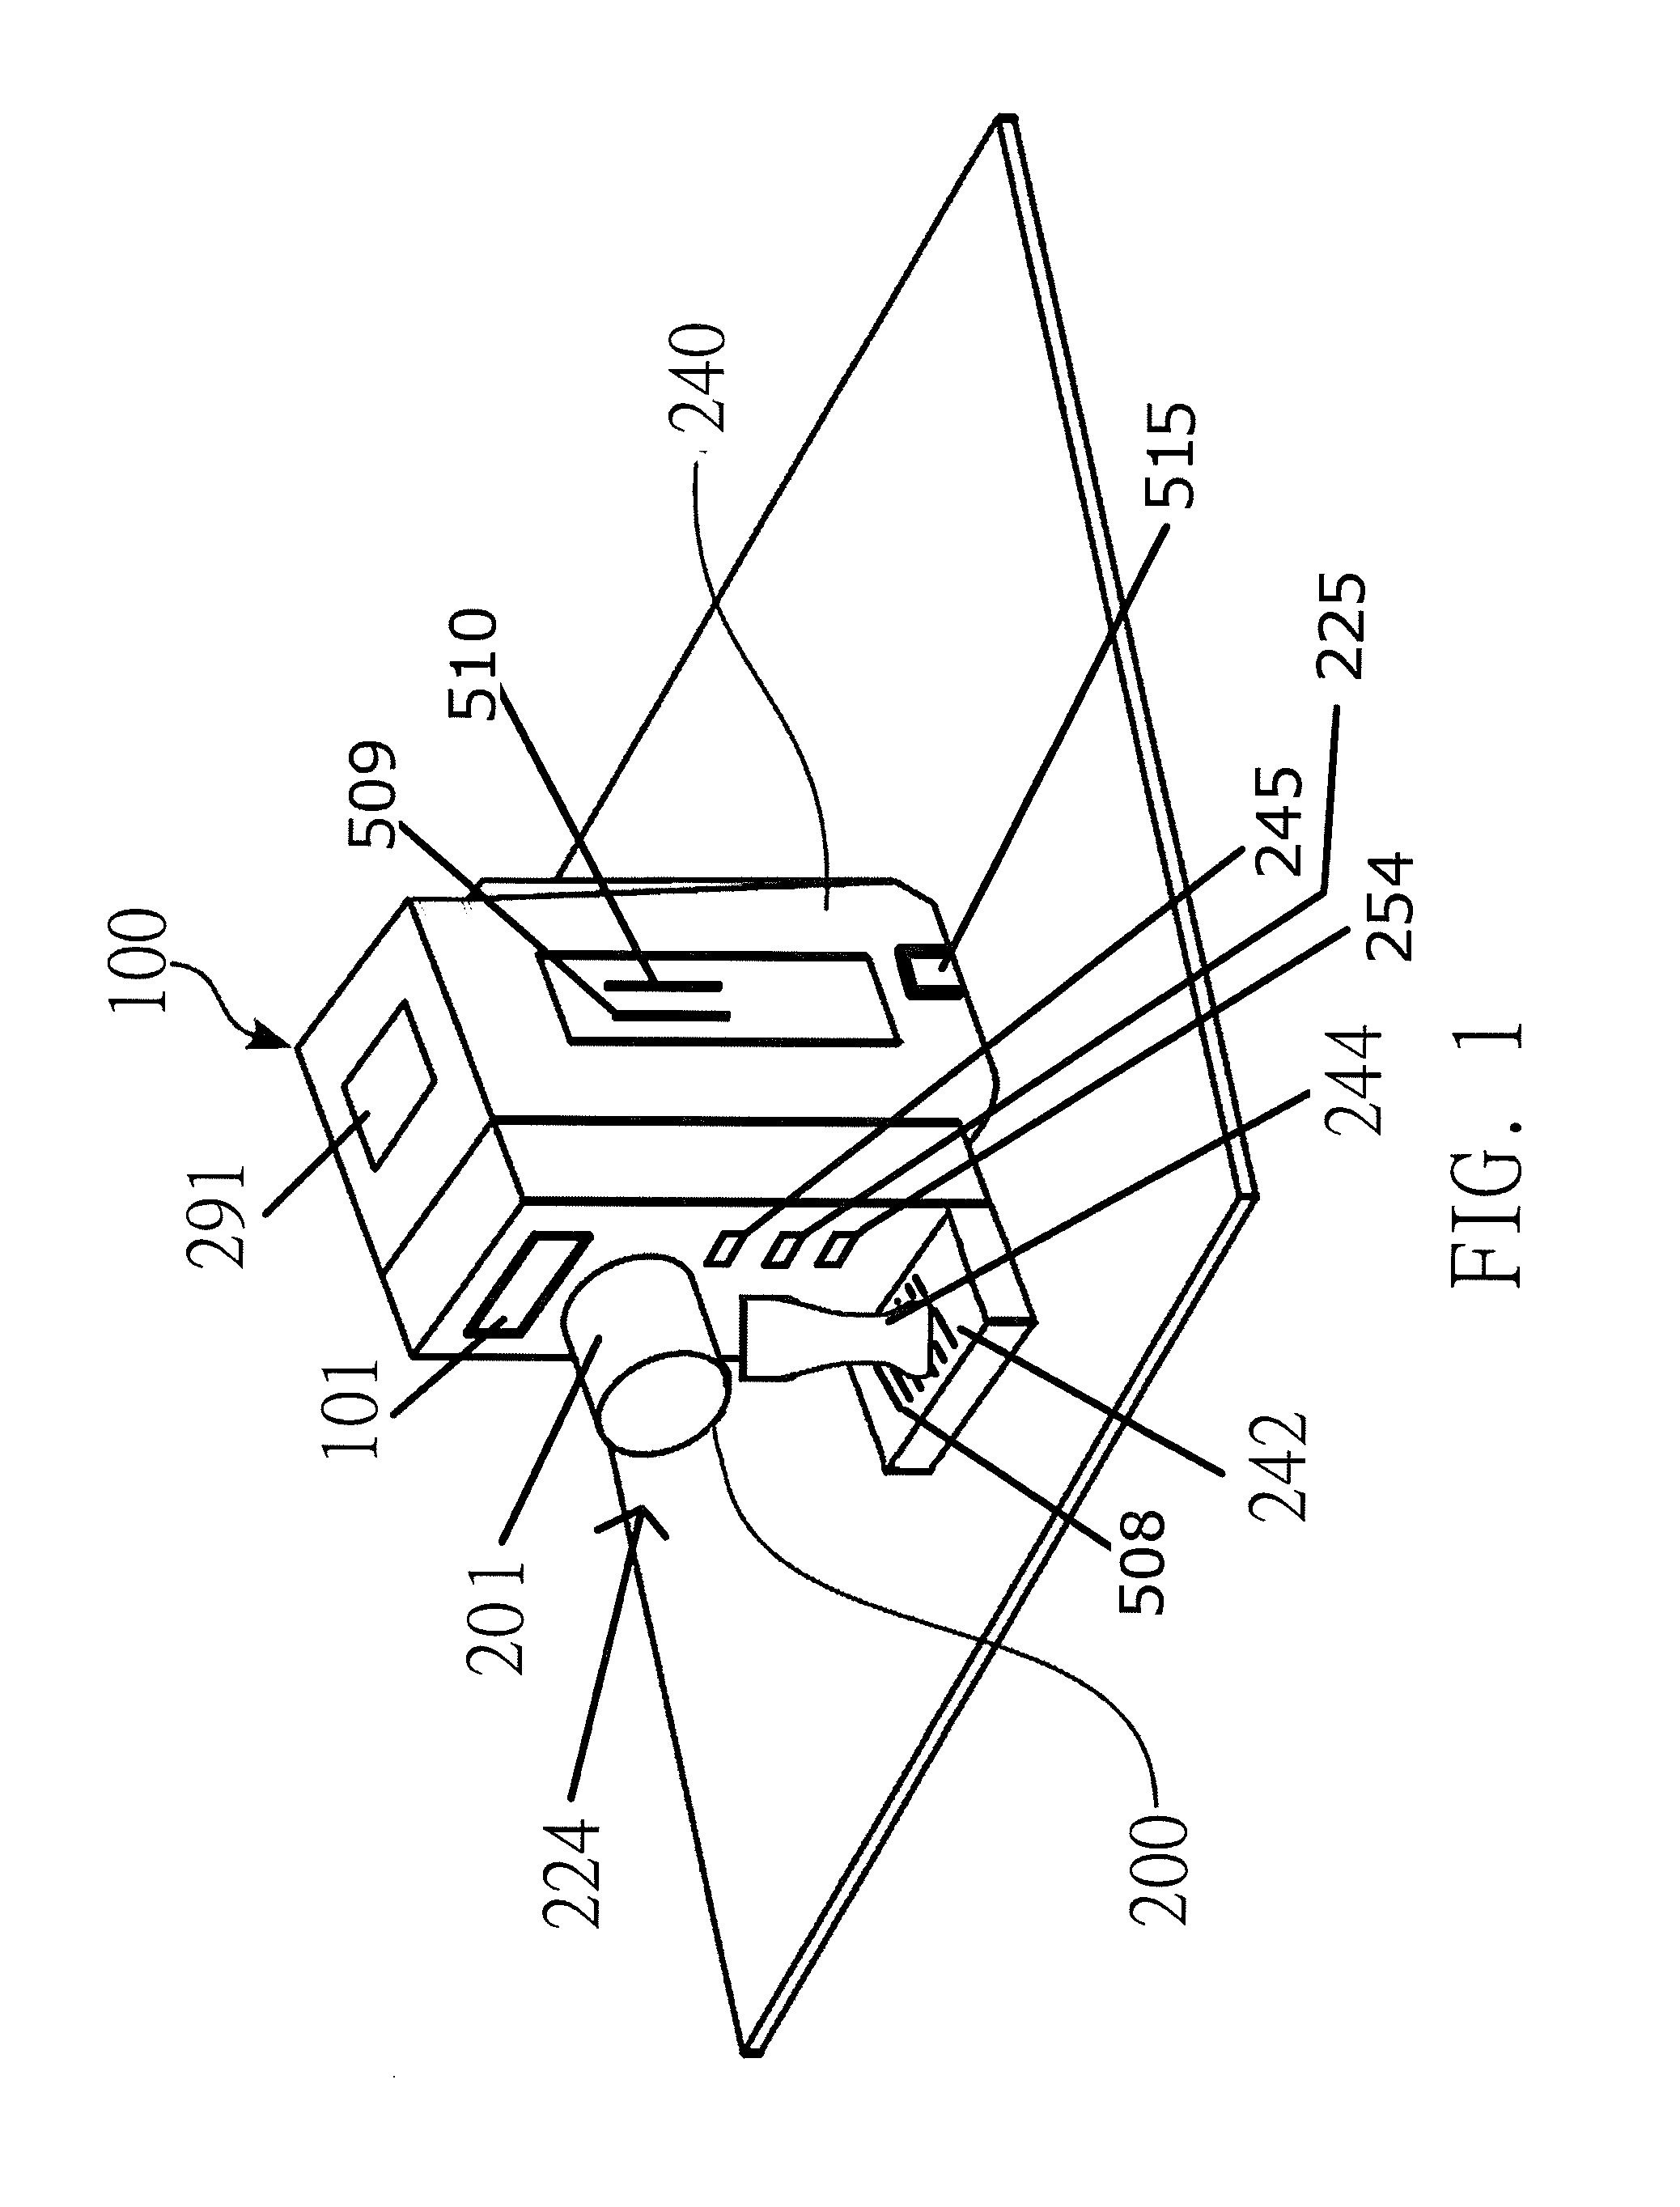 Capsule-based alcoholic beverage forming apparatus and components thereof